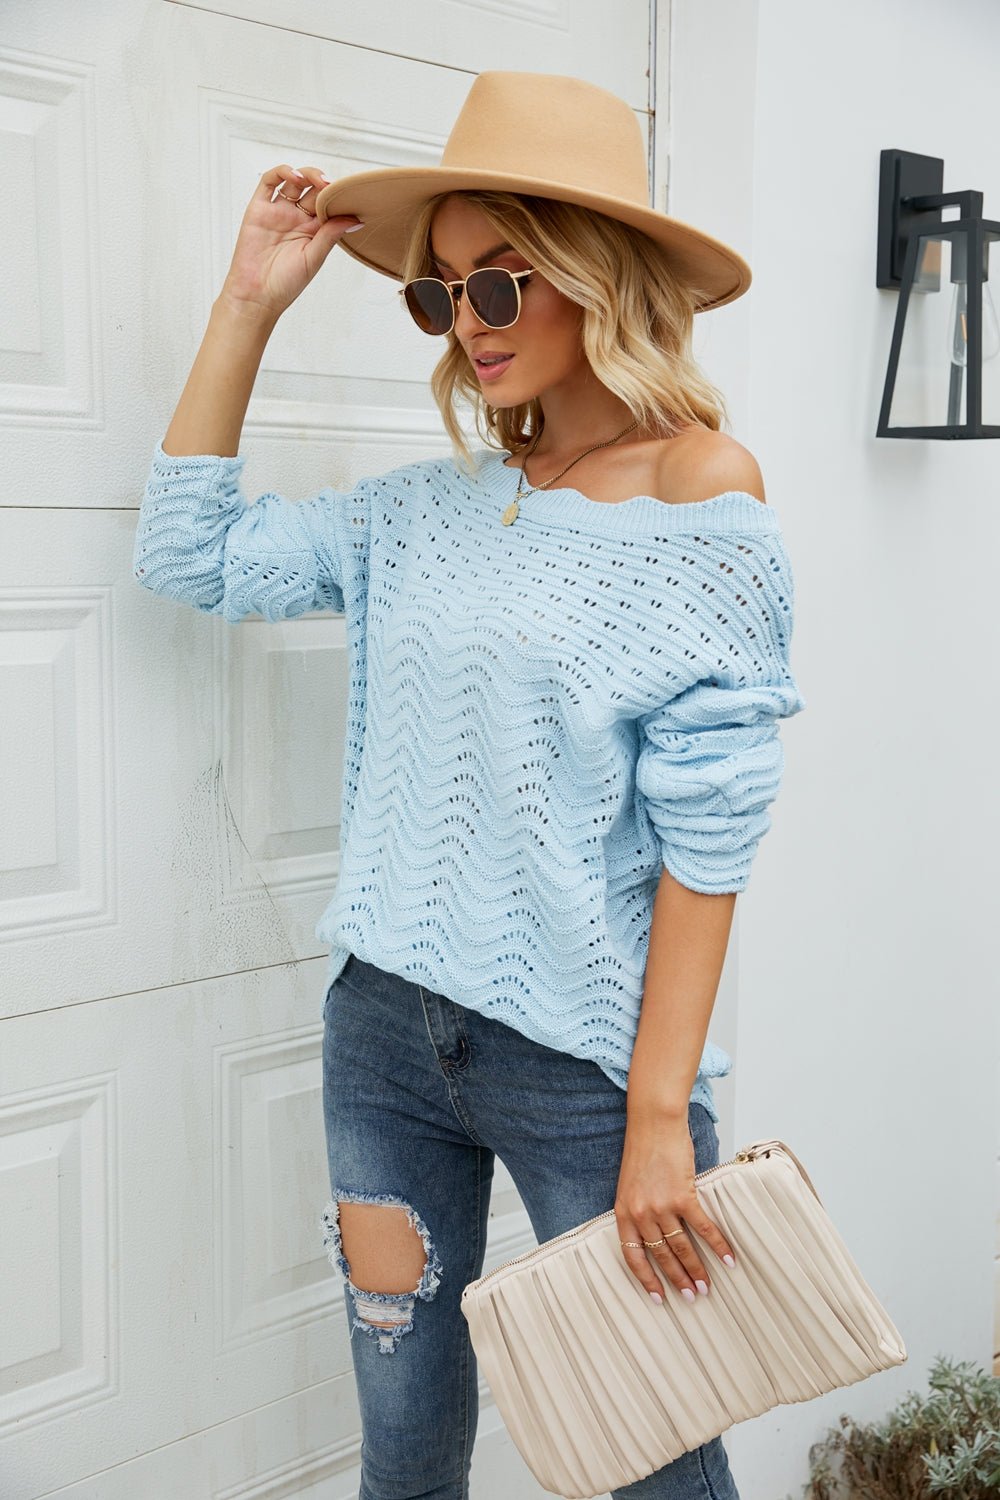 Scalloped Boat Neck Openwork Tunic Sweater  | KIKI COUTURE-Women's Clothing, Designer Fashions, Shoes, Bags